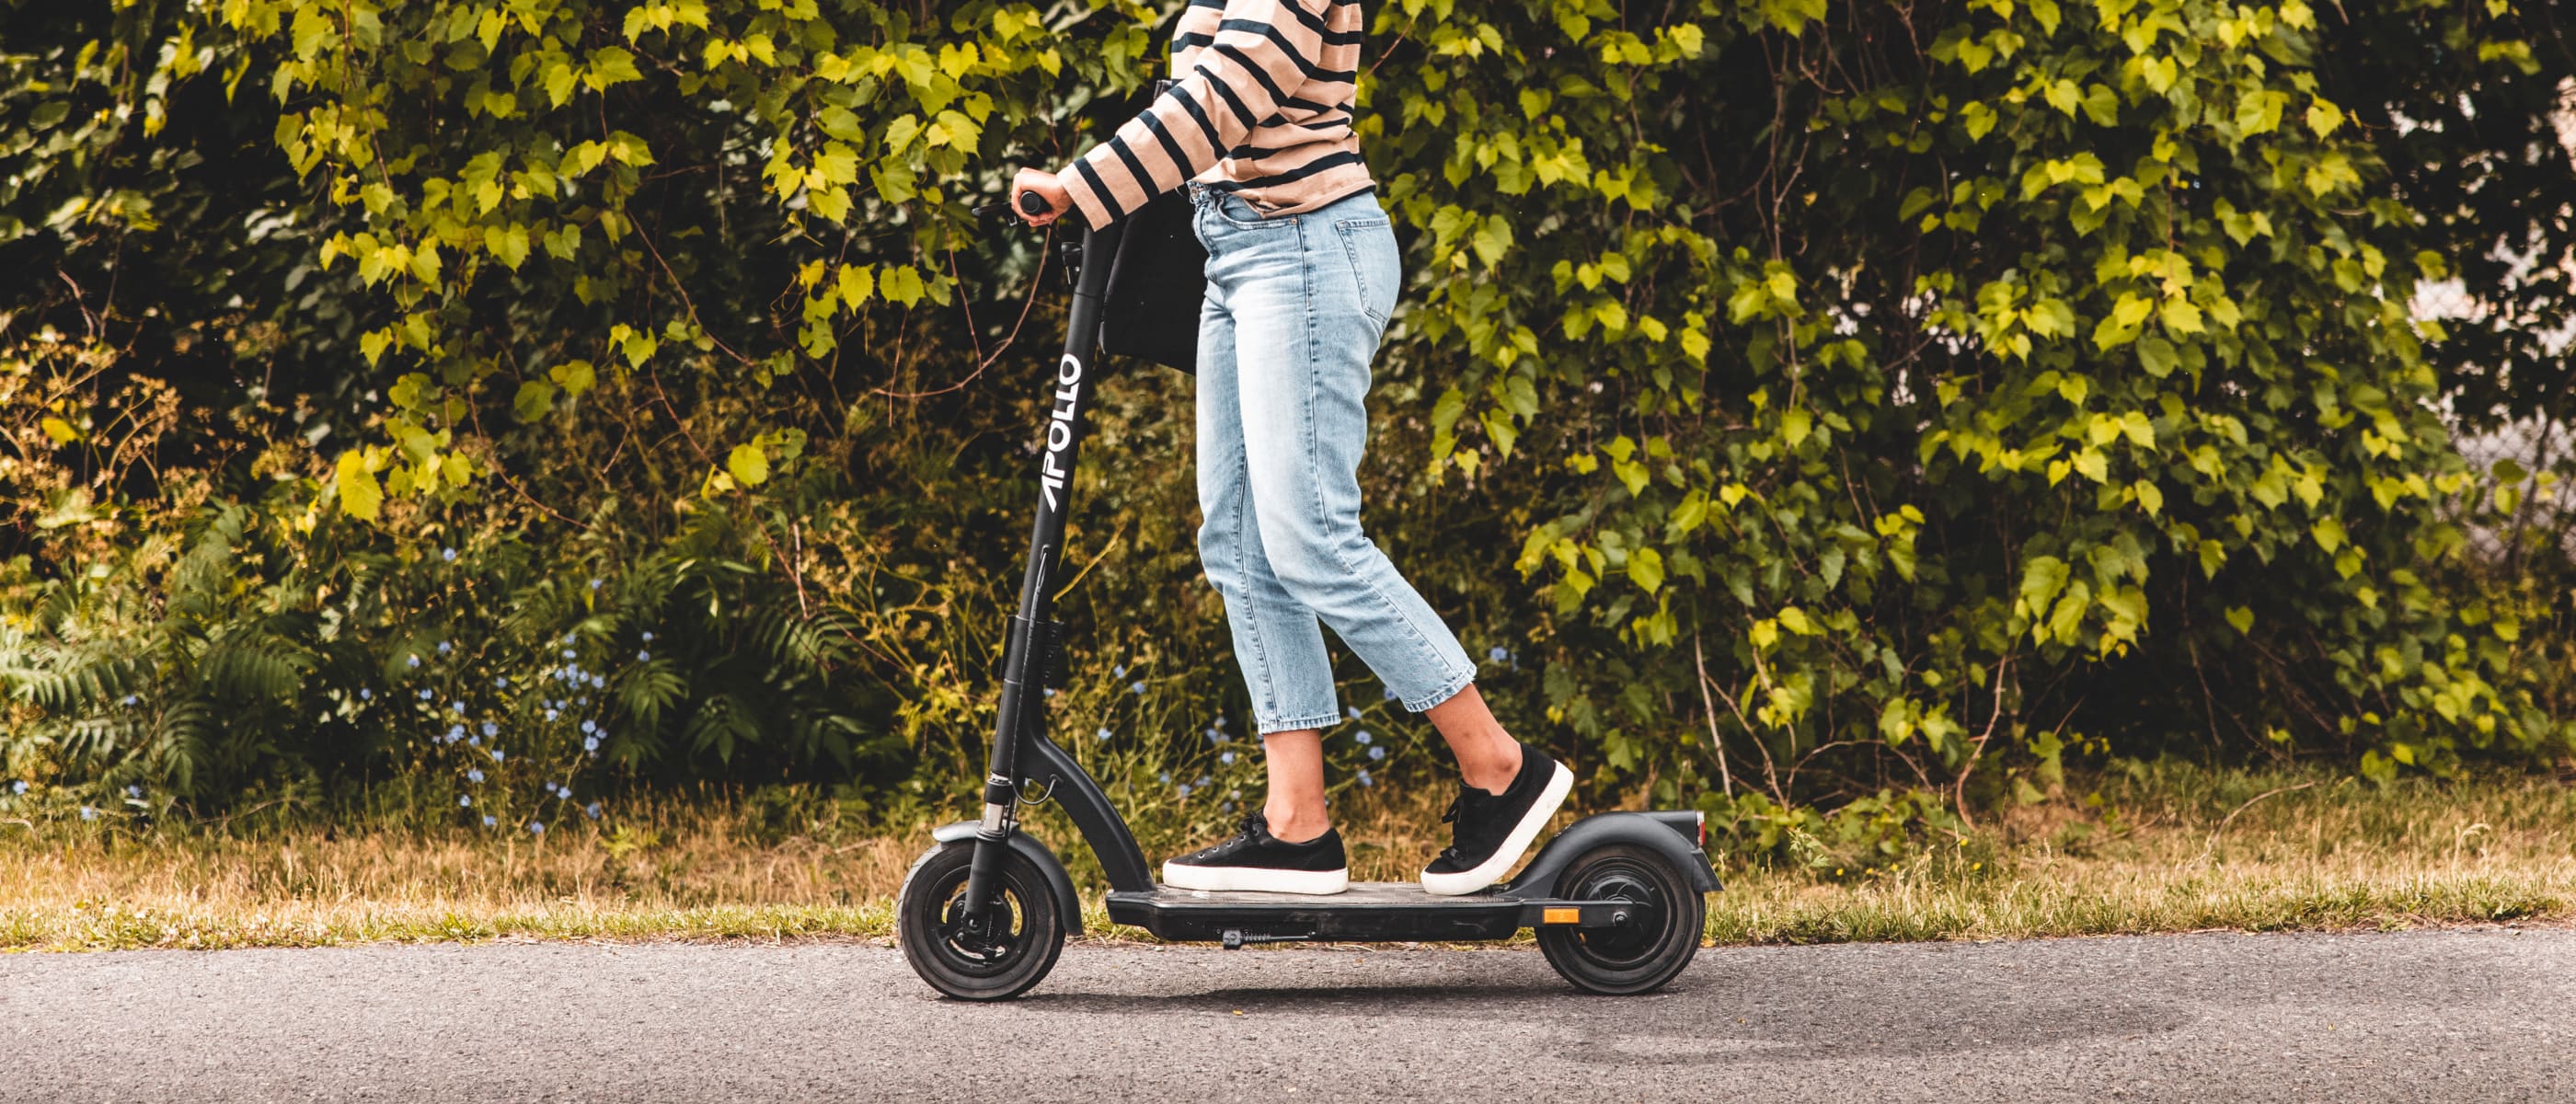 Health Benefits of Riding an Electric Scooter - Apollo Scooters